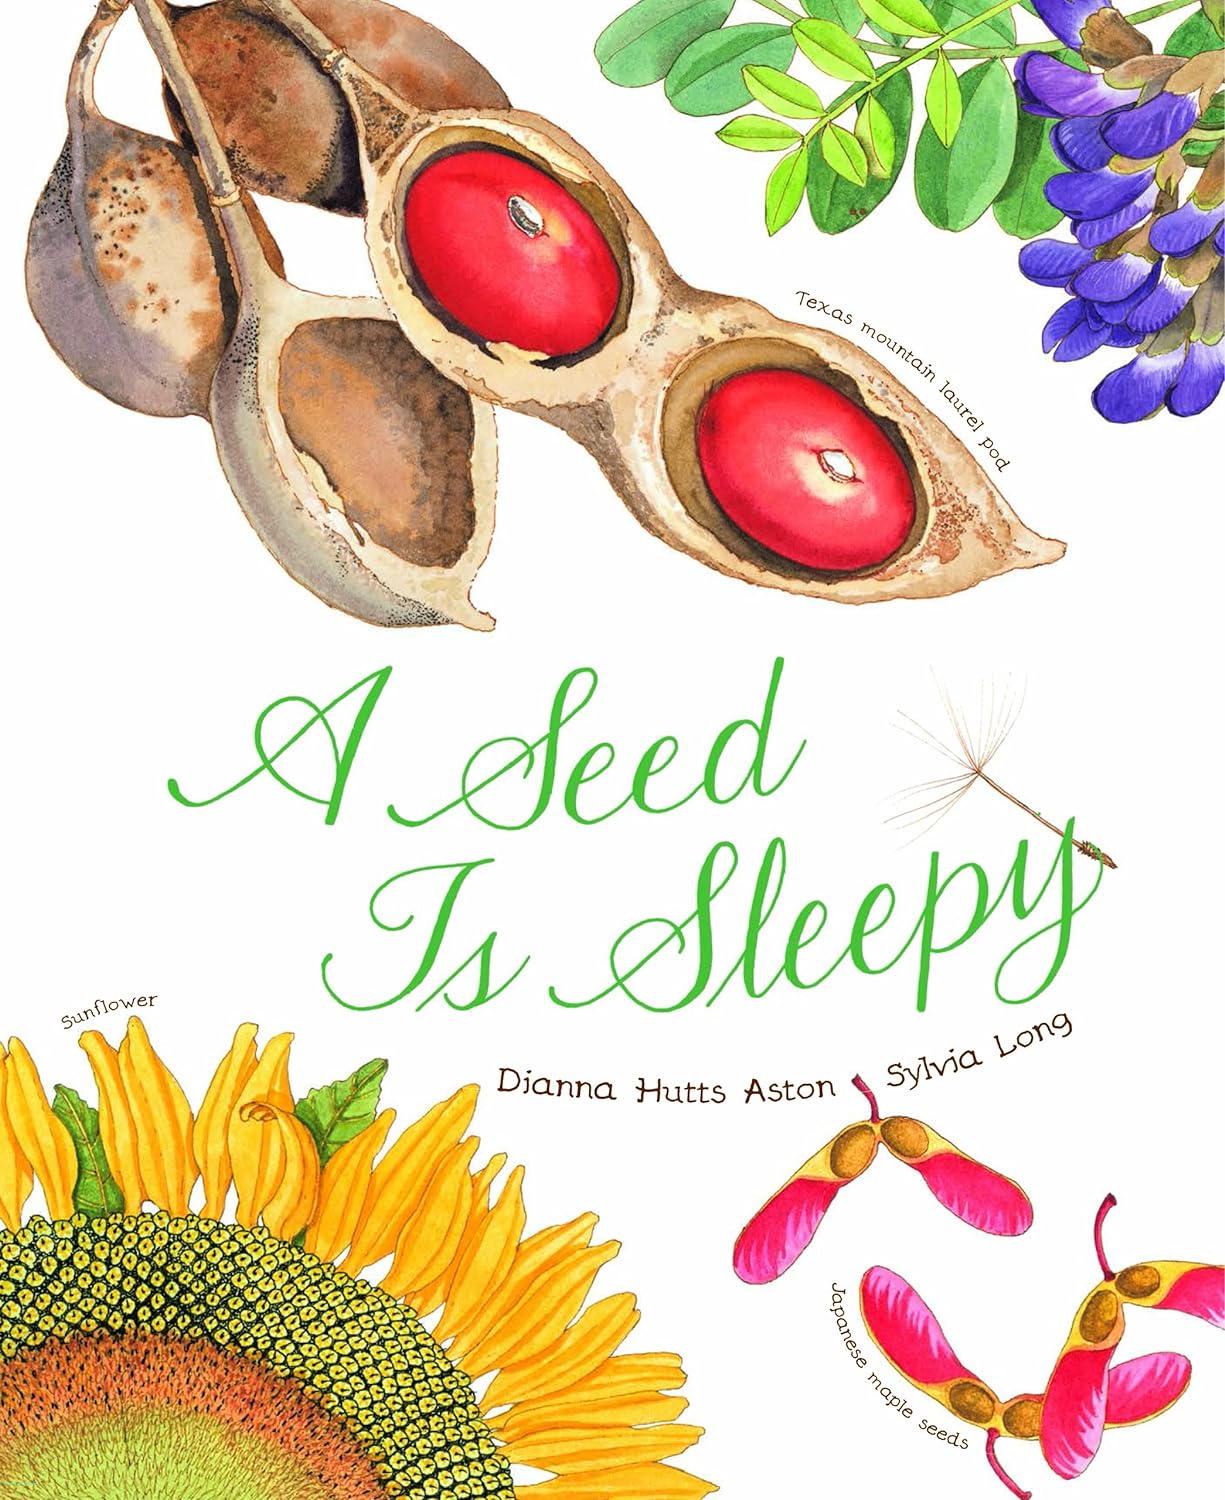 Chronicle Books 'A Seed Is Sleepy' by Dianna Hutts Aston, illustrated by Sylvia Long